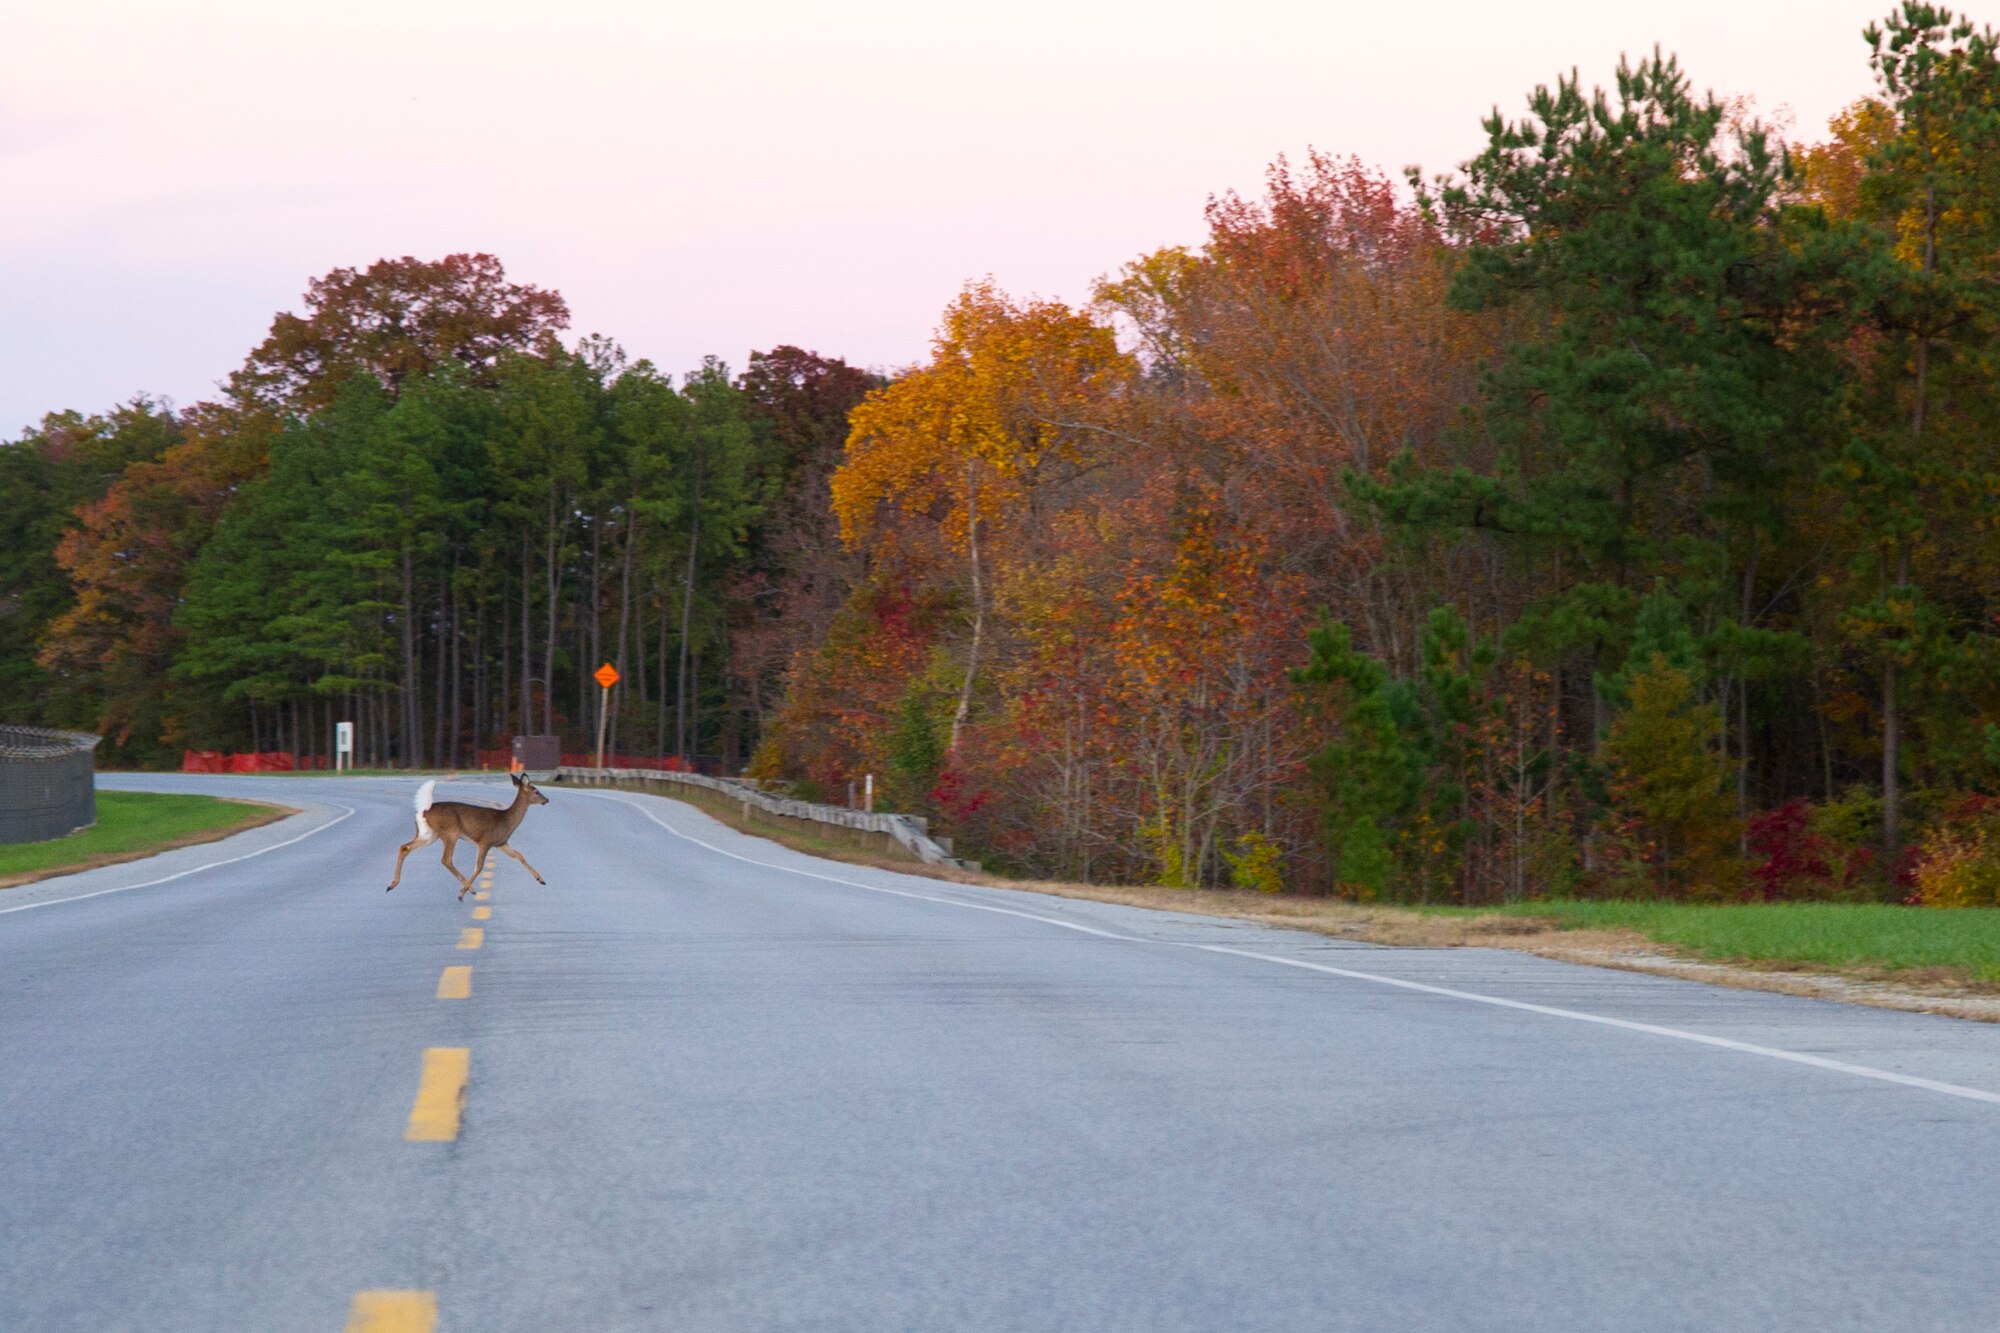 A deer crosses Perimeter Rd. on Joint Base Andrews, Md., Oct. 27, 2014. During the fall, deer related activity begins to increase and drivers are reminded to be extra vigilant while driving.  (U.S. Air Force photo/Airman 1st Class Ryan J. Sonnier)